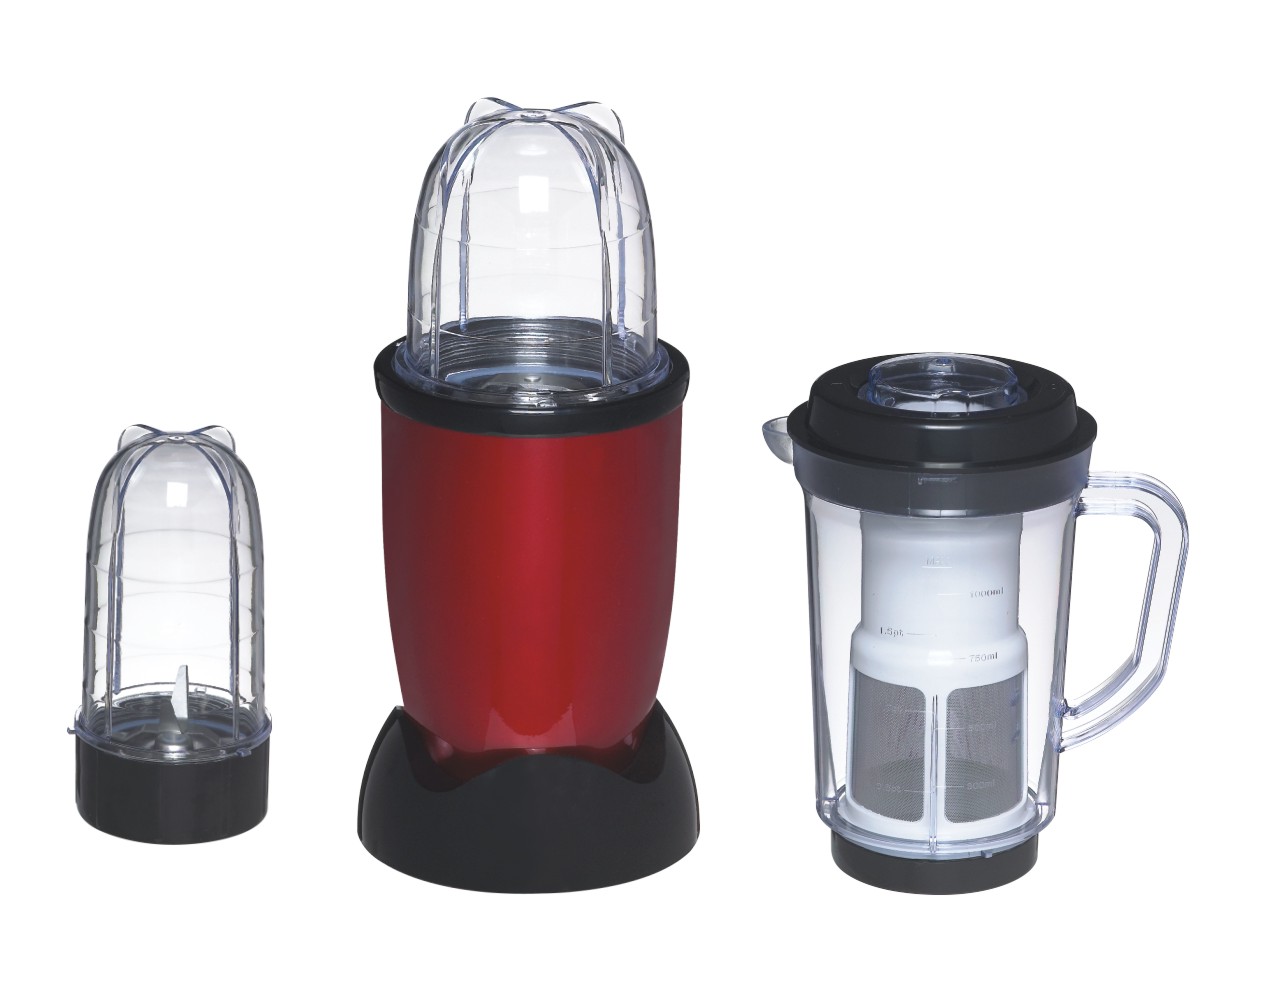  4-in-1 Juicer/Blender with Anti-overheat Device, 450mL Juicer and 260mL Blender Cups 